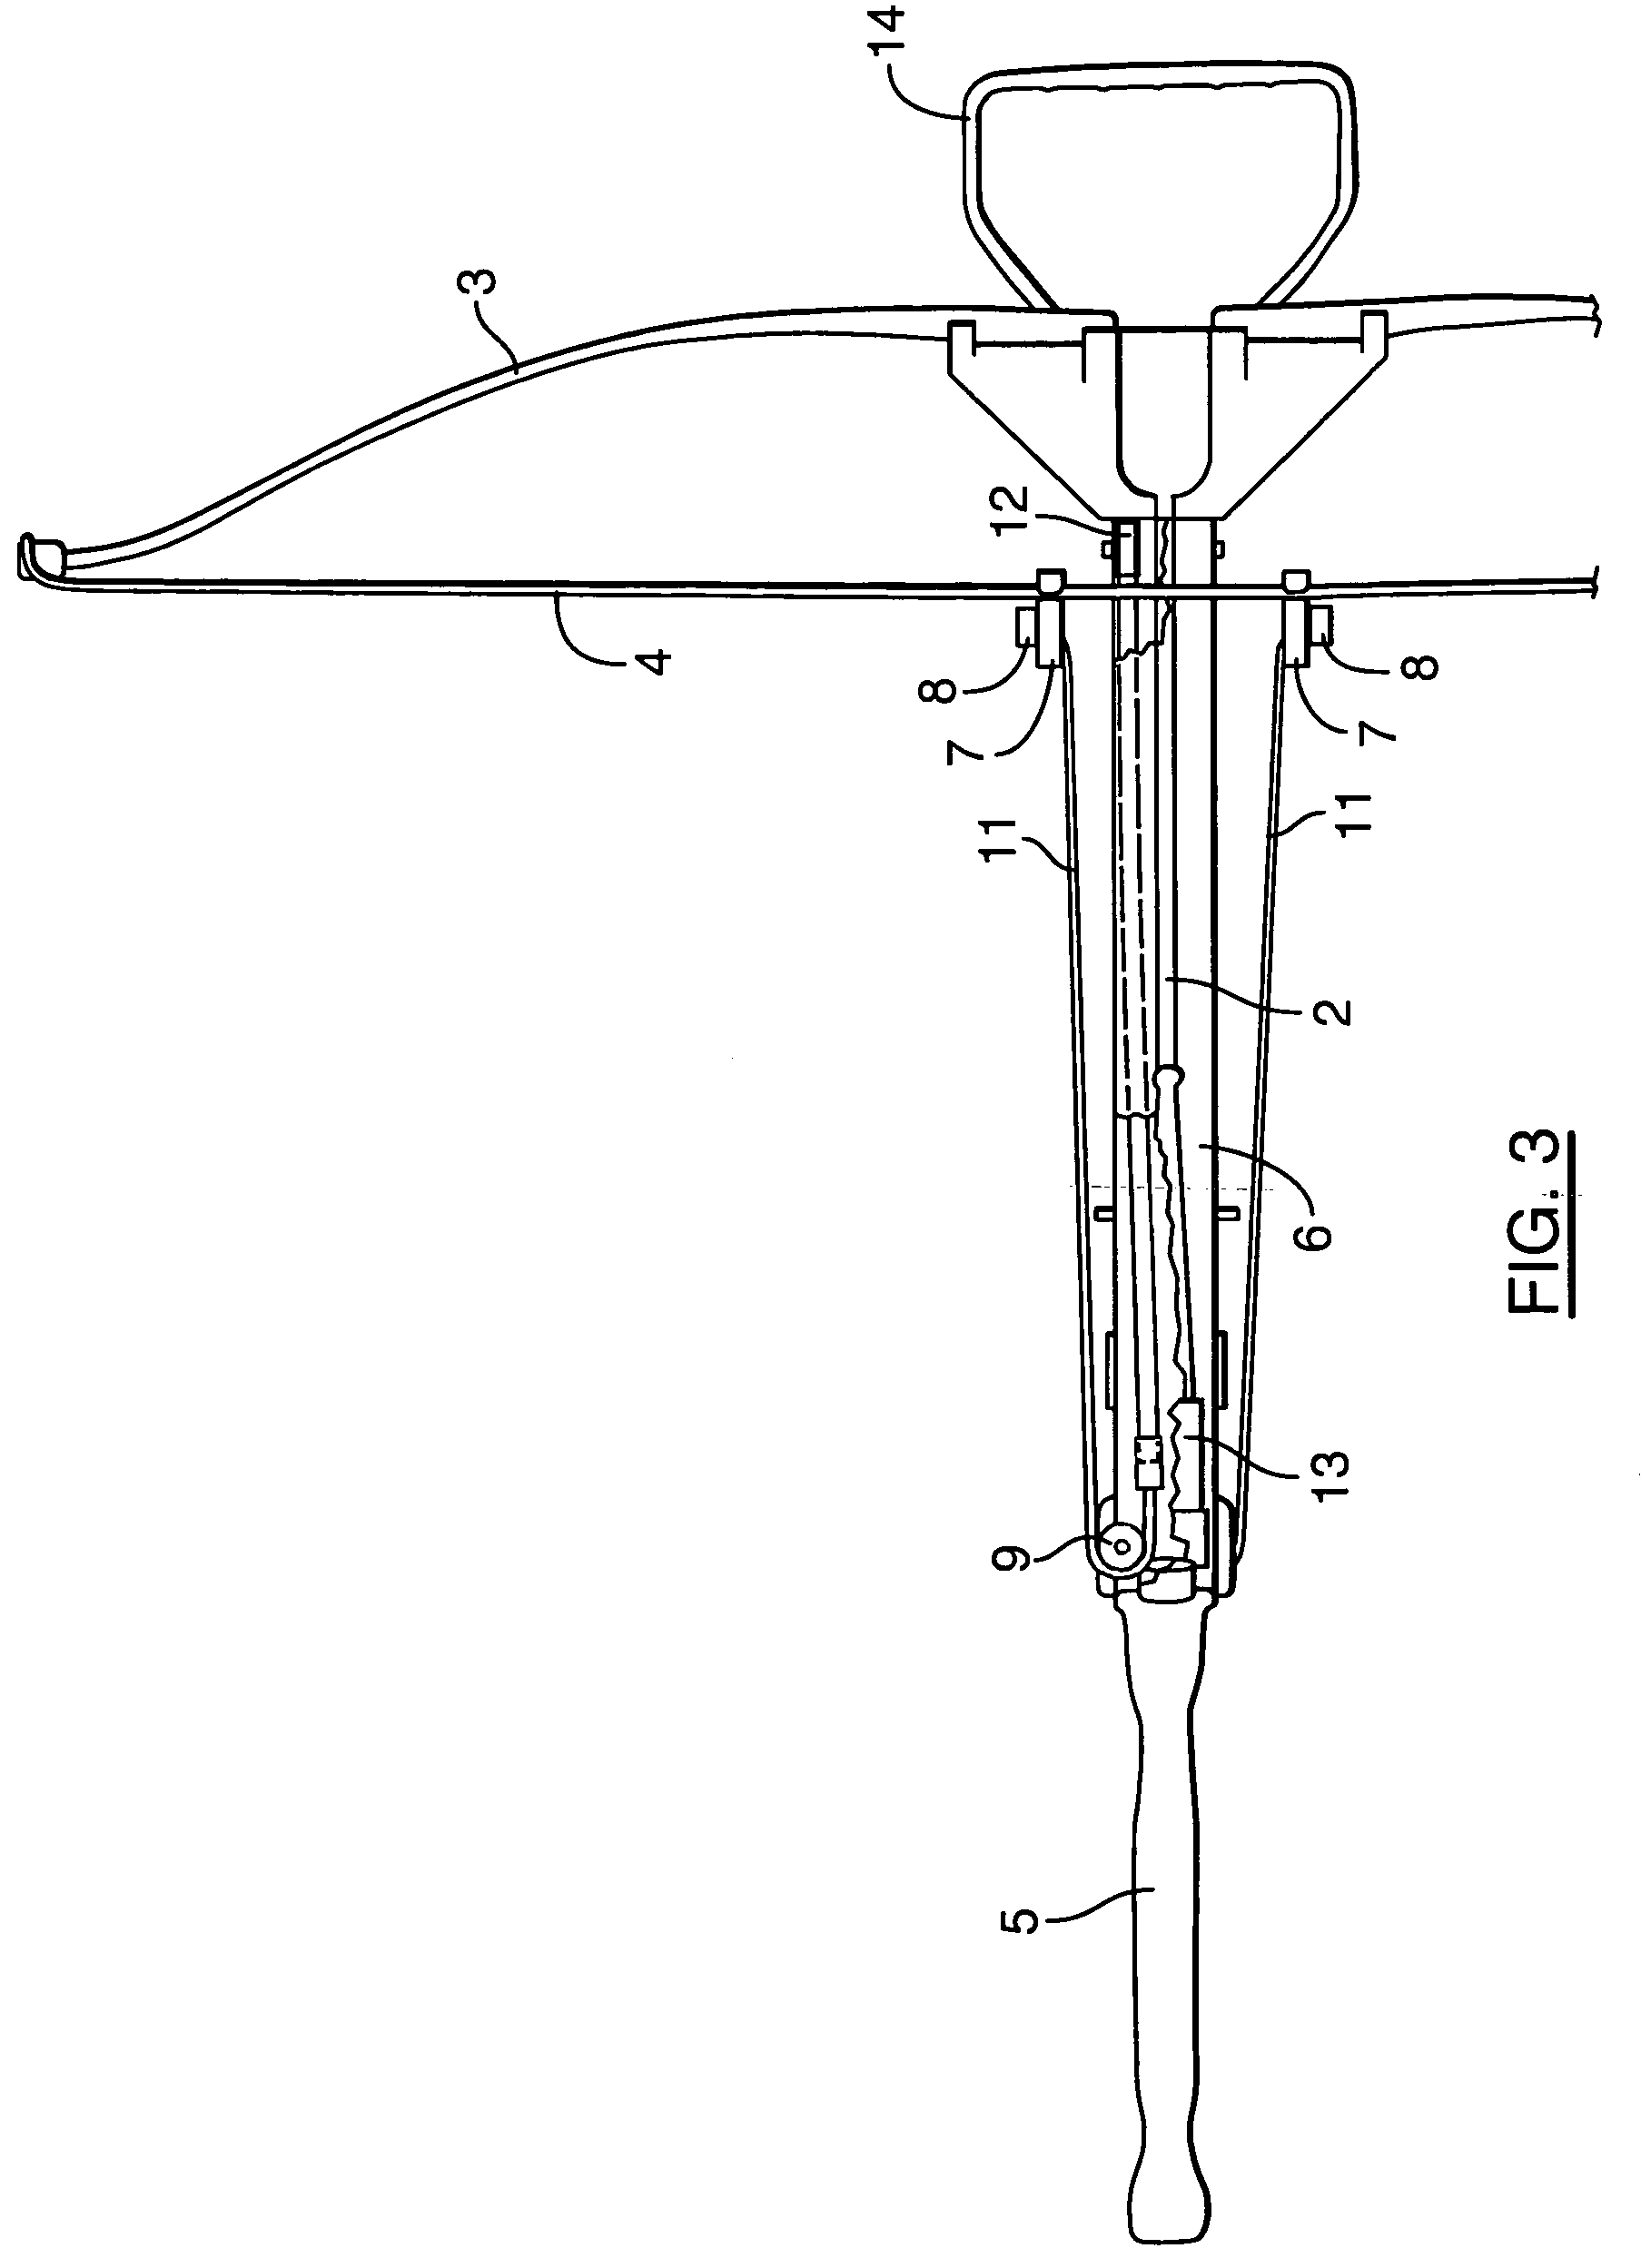 Crossbow cocking and stringing device